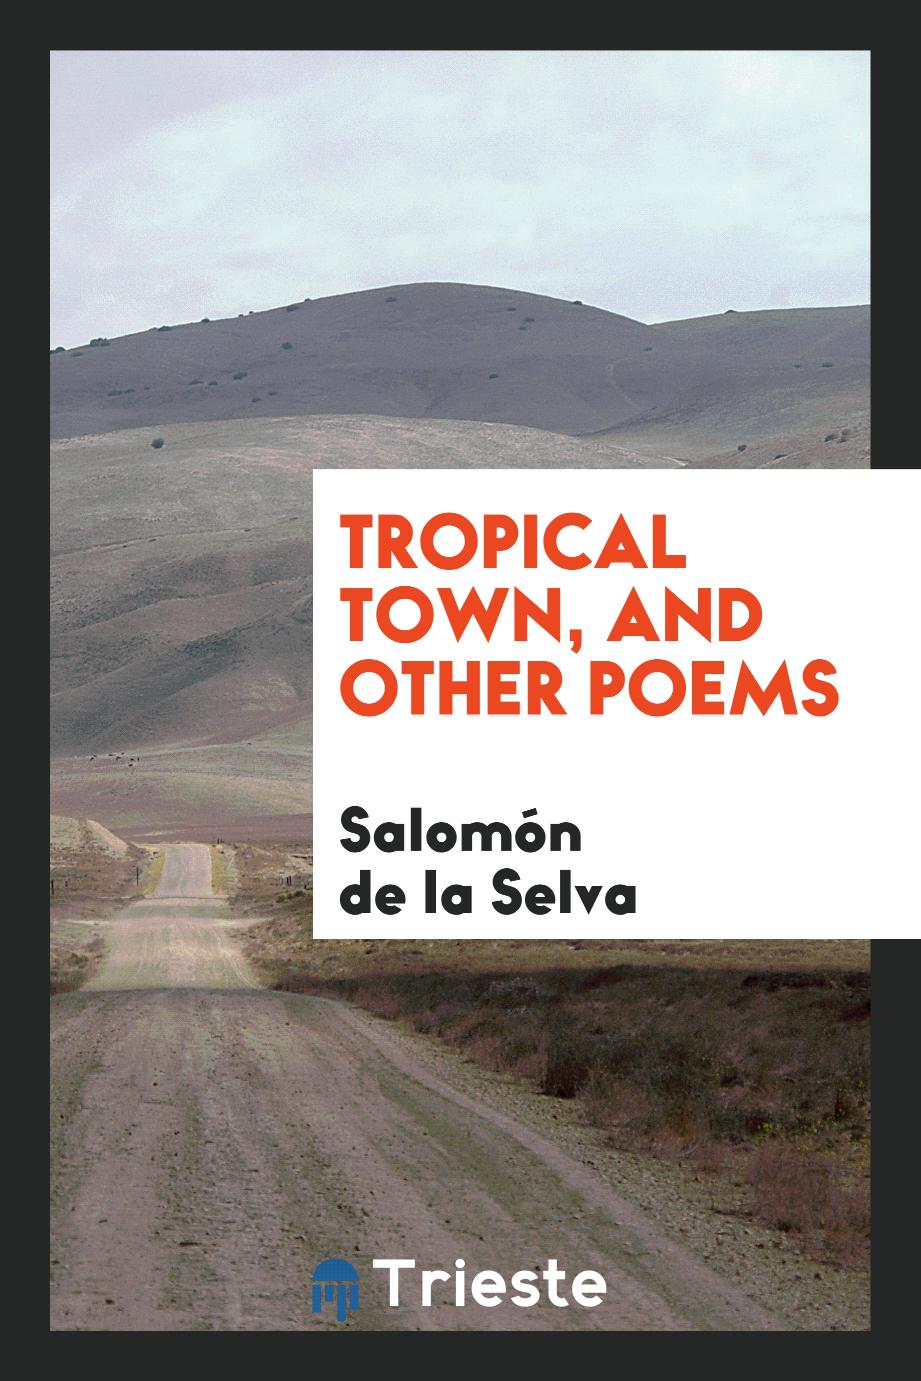 Tropical town, and other poems